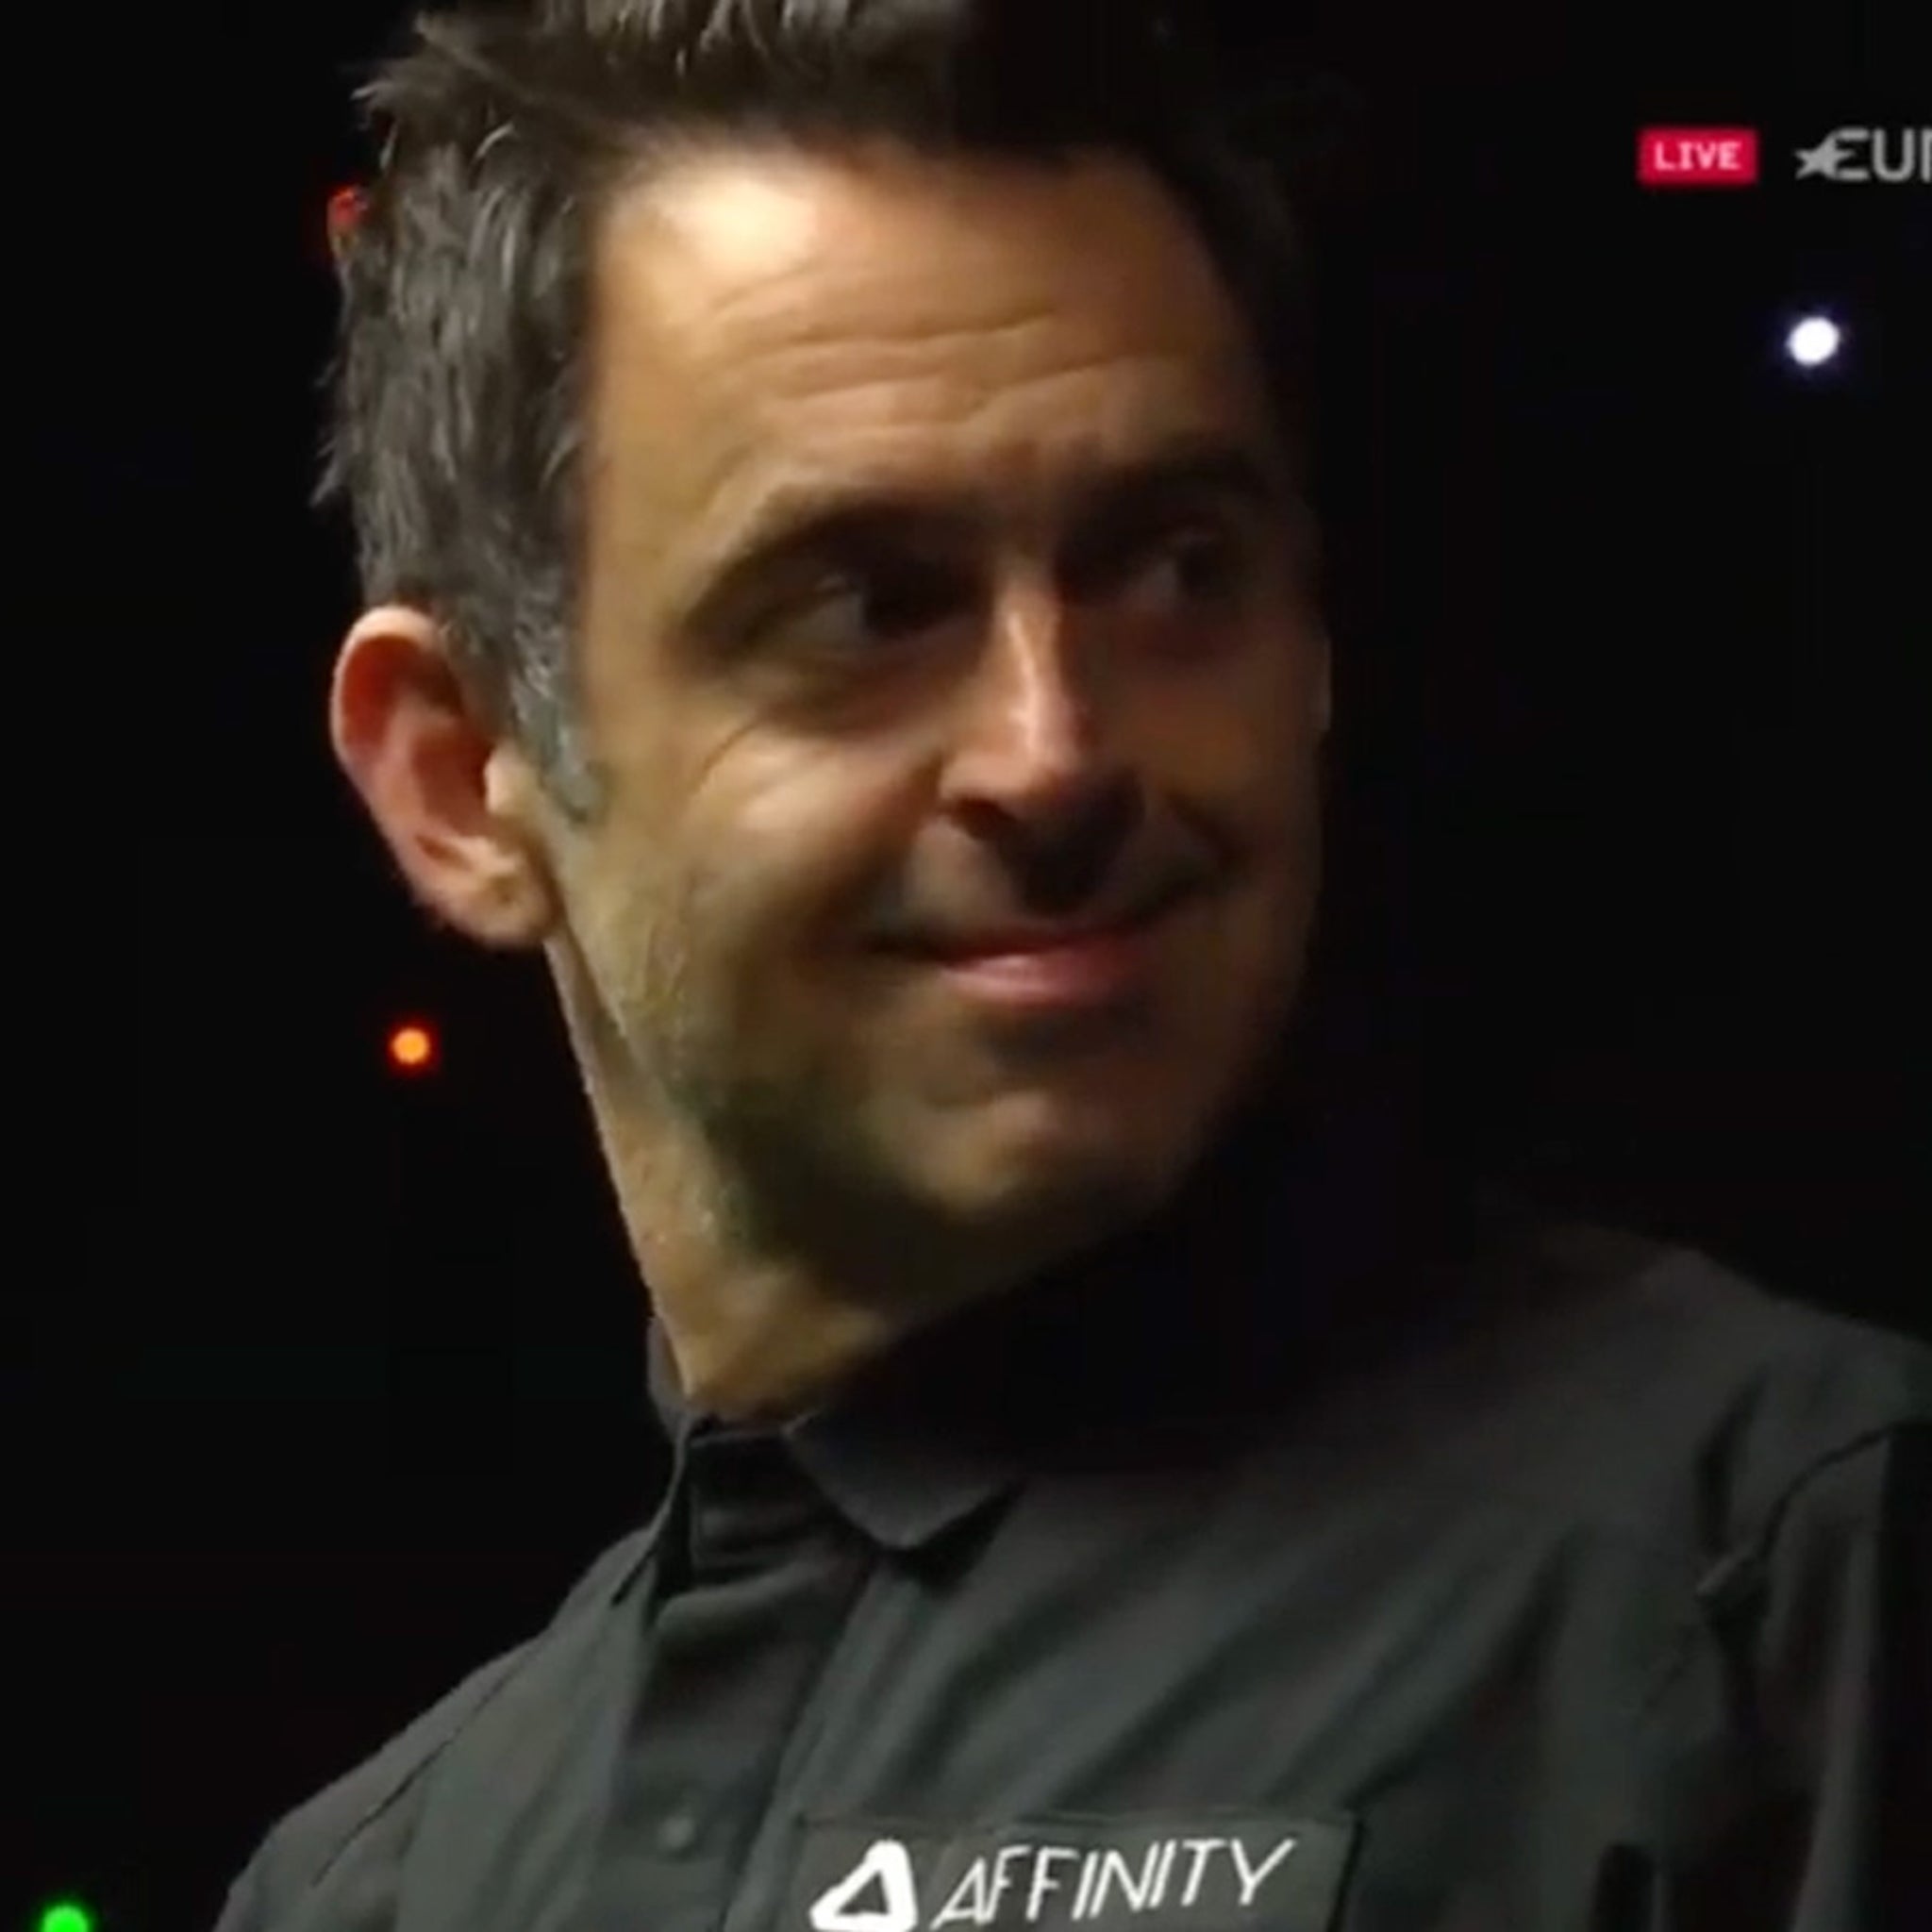 Snooker Star Ronnie OSullivan Rips Huge Fart and Blames Ref, Busted By Video